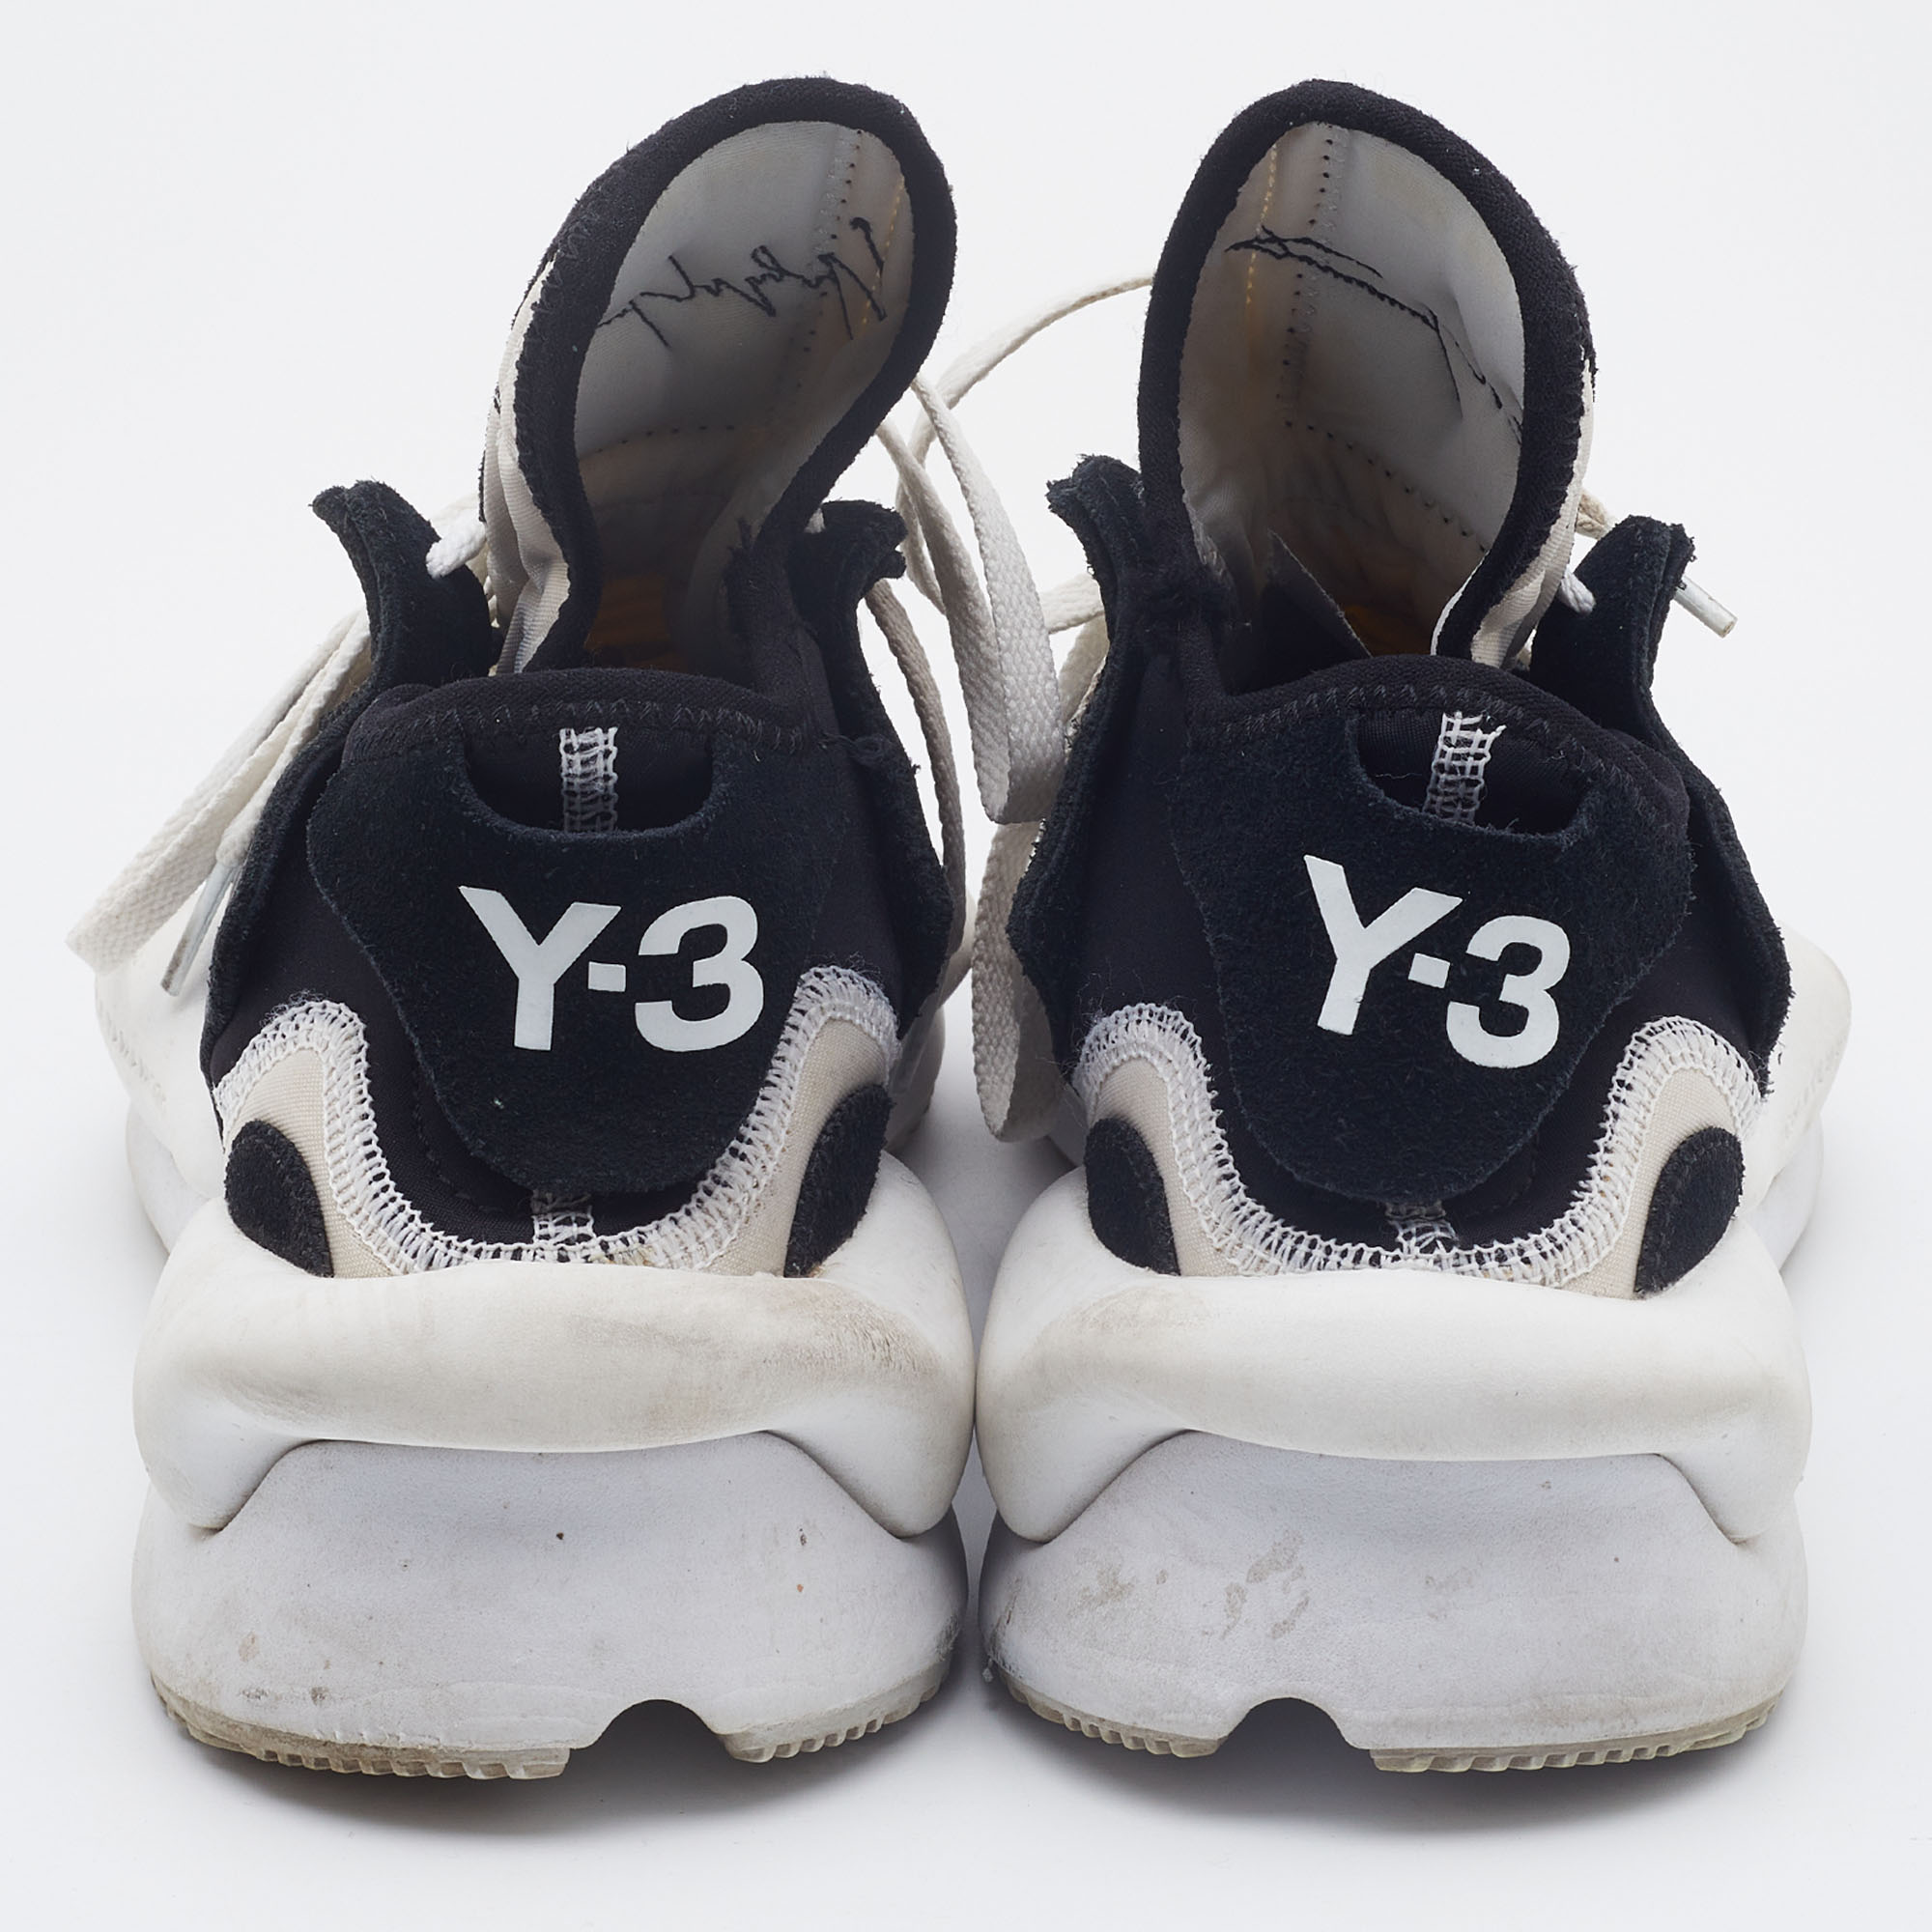 Y-3 Black/White Leather And Fabric Kaiwa Sneakers Size 40